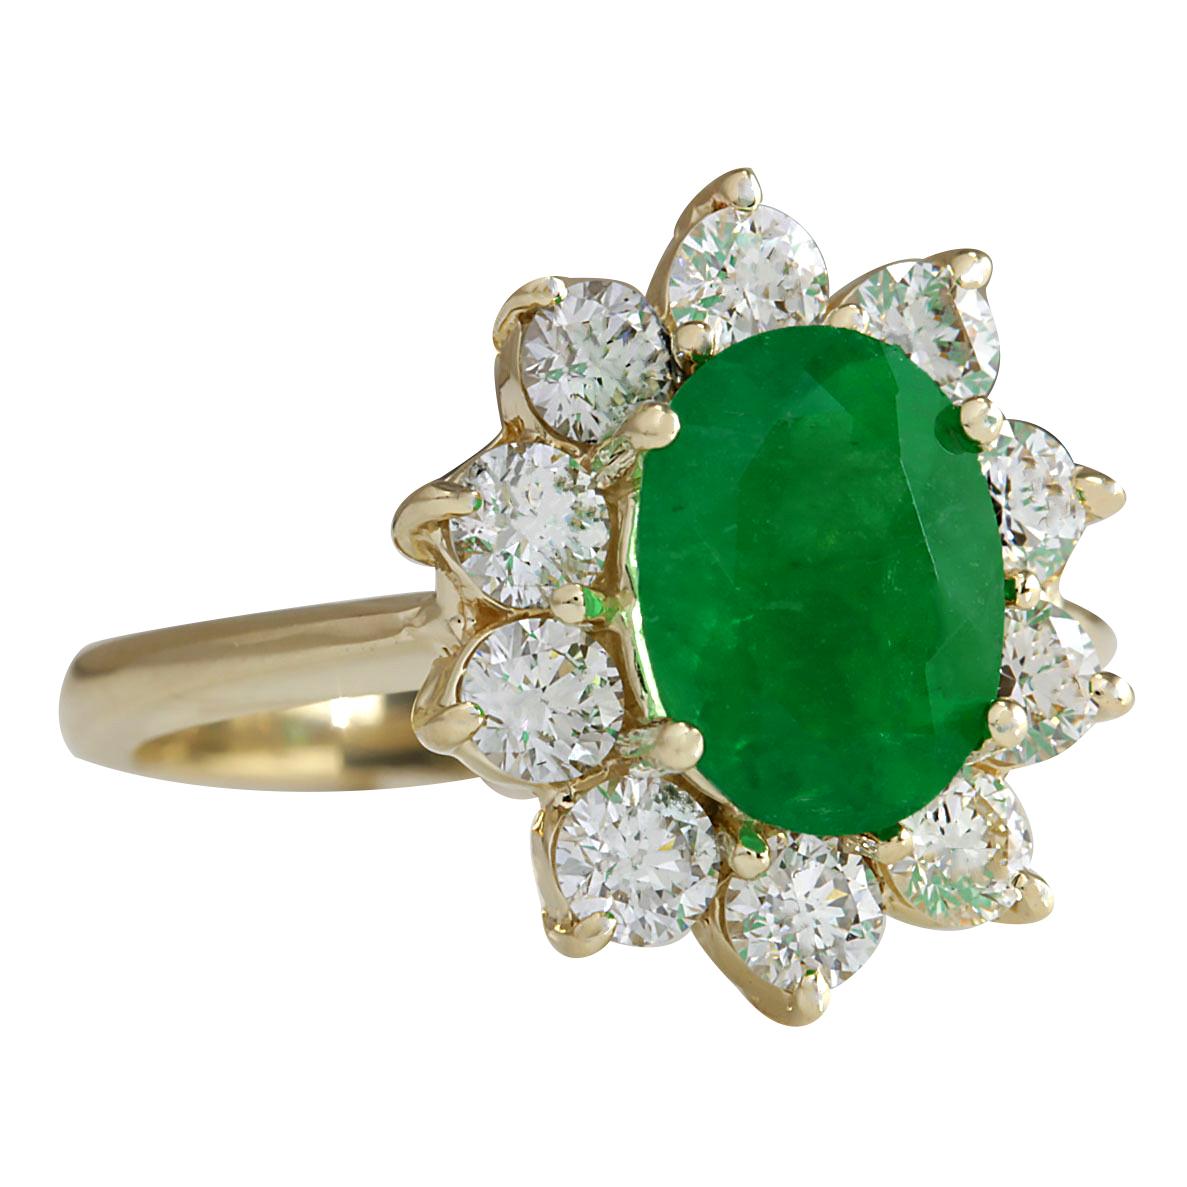 Stamped: 18K Yellow Gold
Total Ring Weight: 4.5 Grams
Ring Length: N/A
Ring Width: N/A
Gemstone Weight: Total Natural Emerald Weight is 1.93 Carat (Measures: 9.25x7.20 mm)
Color: Green
Diamond Weight: Total Natural Diamond Weight is 1.15